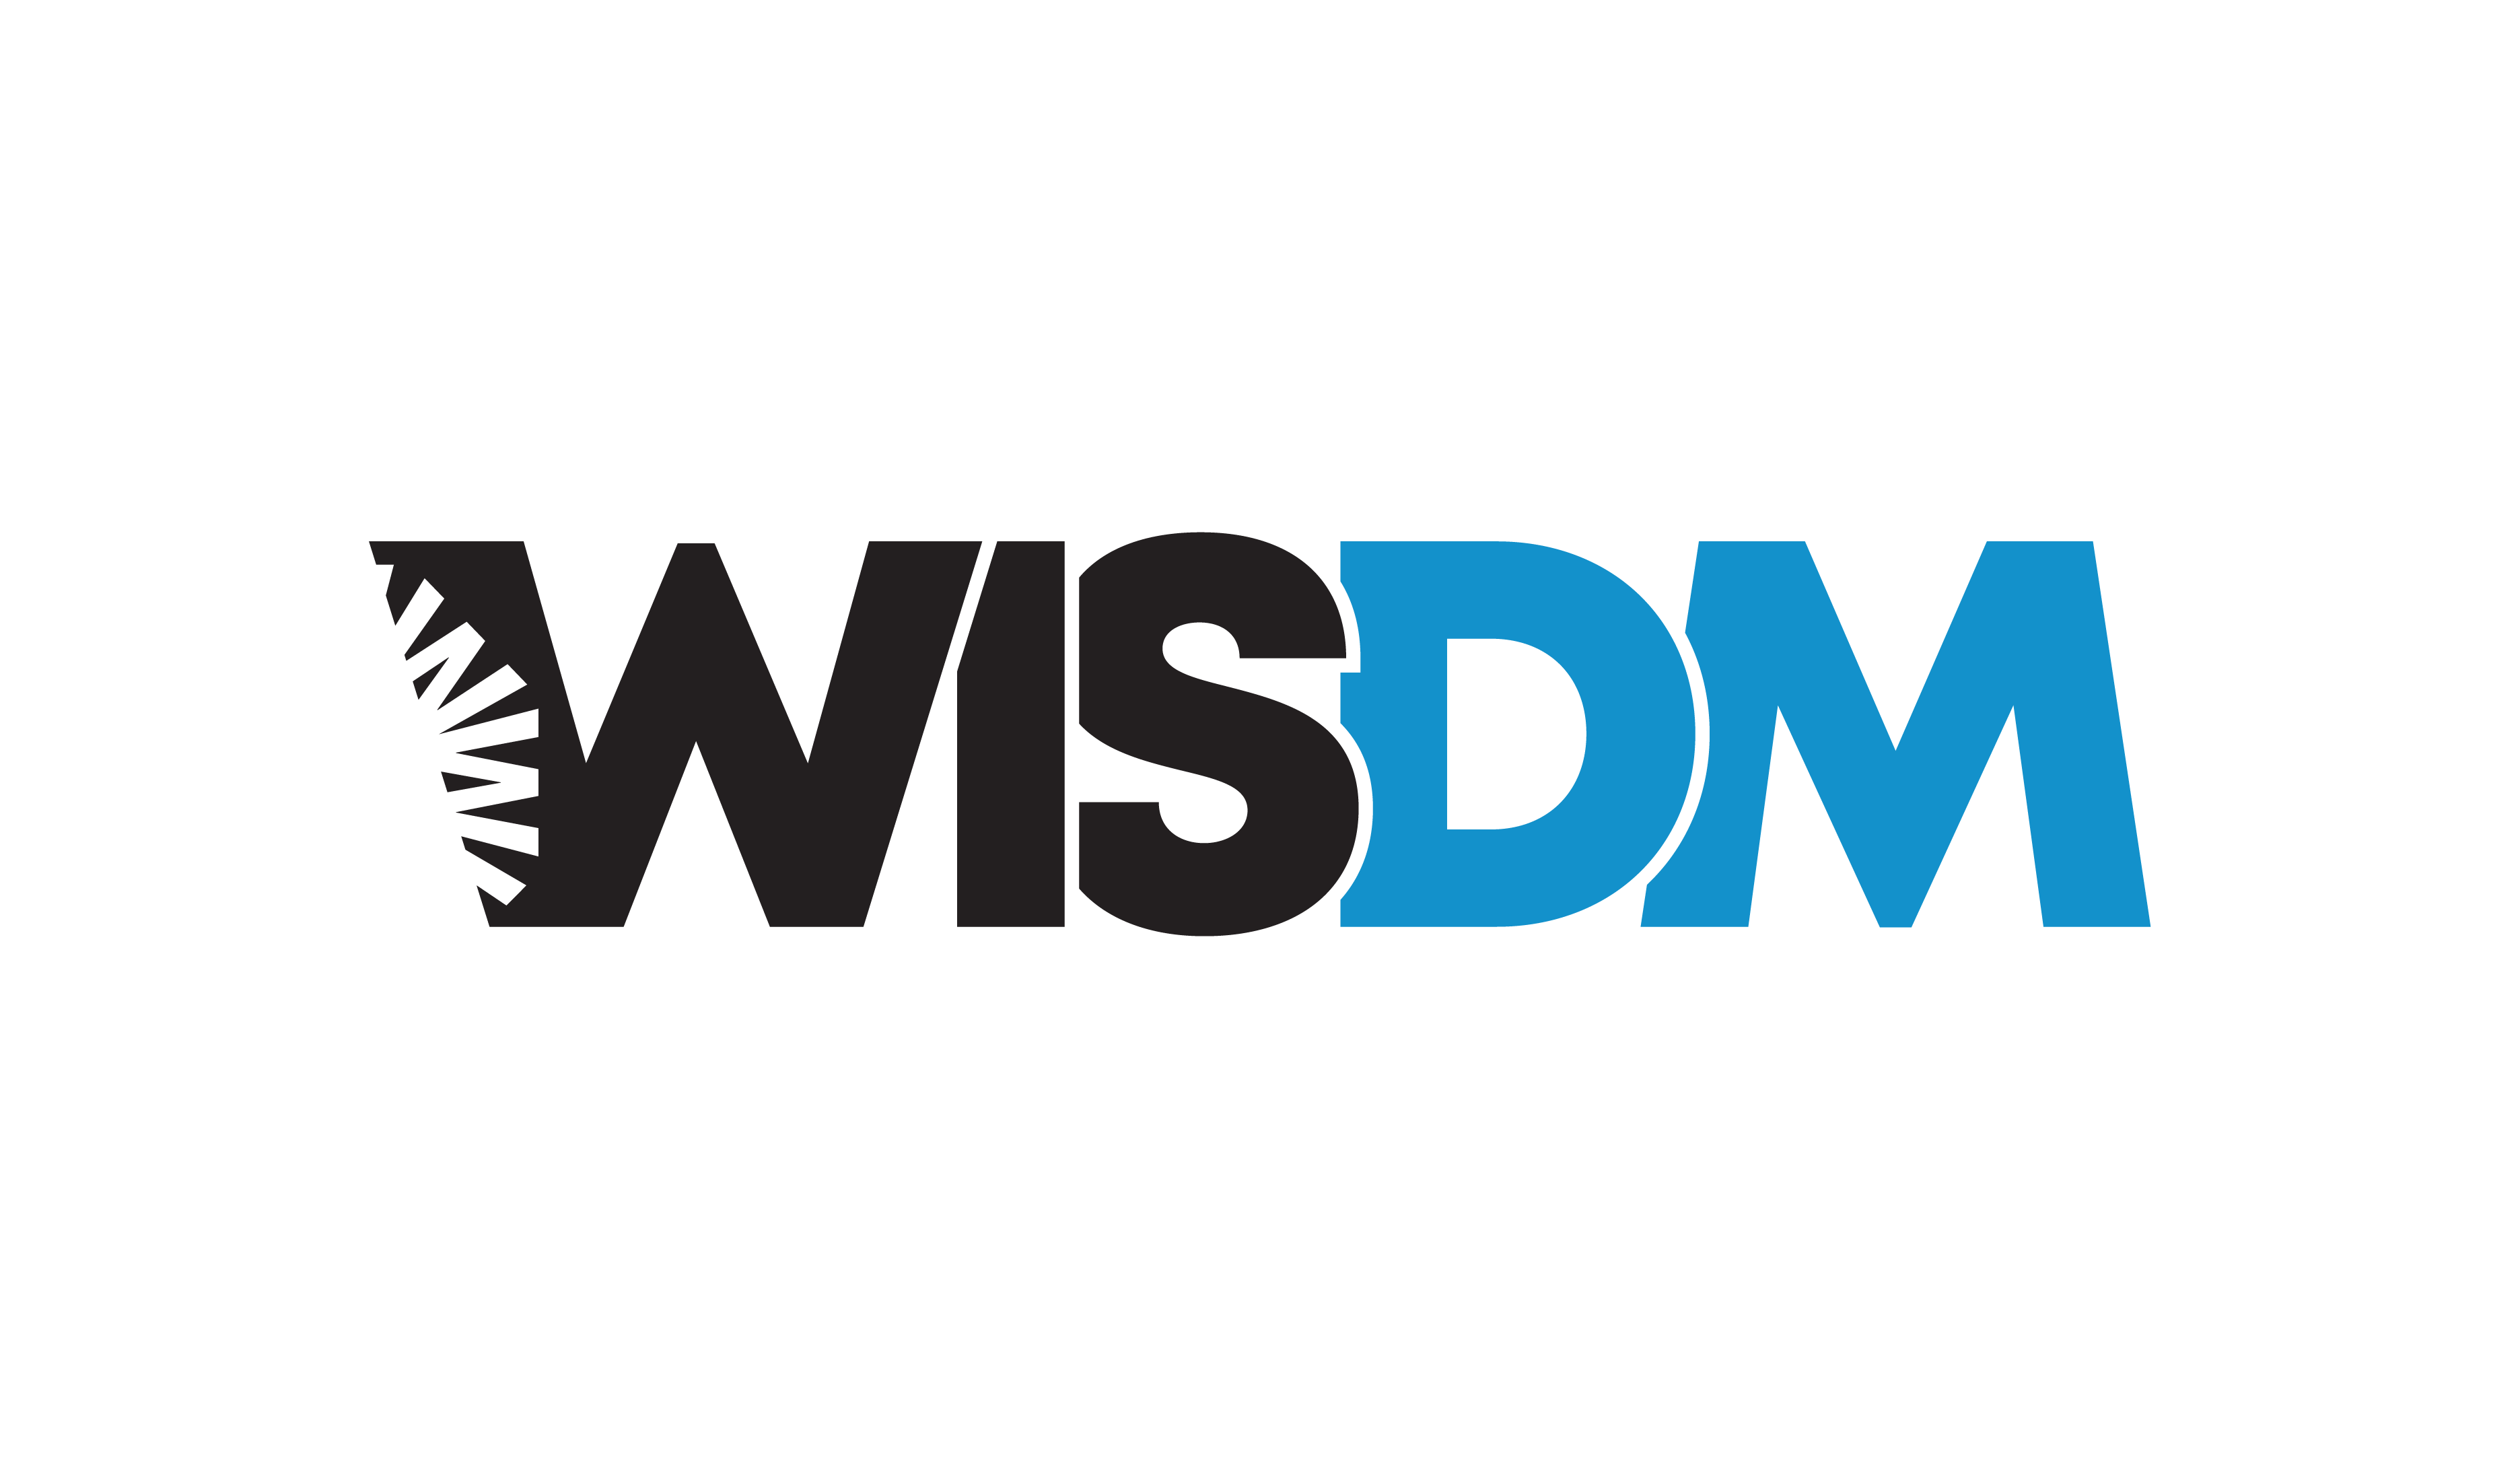 WISDM product logo. Circular W logo from Western Integrated Systems embedded into the W of the logo with the letters WISDM